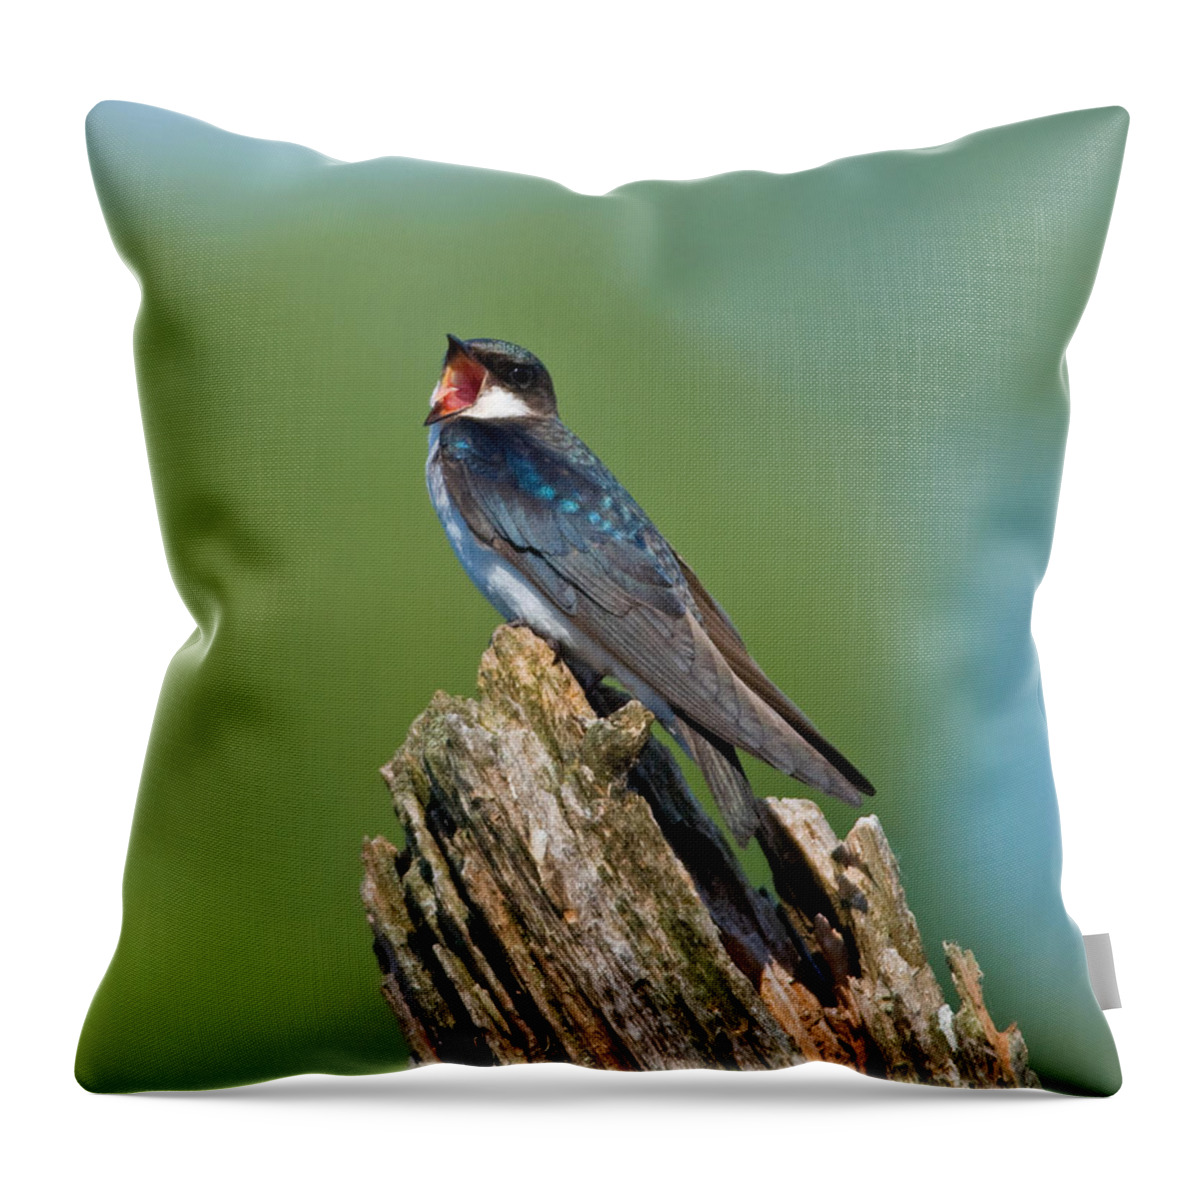 Bird Throw Pillow featuring the photograph Mouthy Tree Swallow by Gerald DeBoer